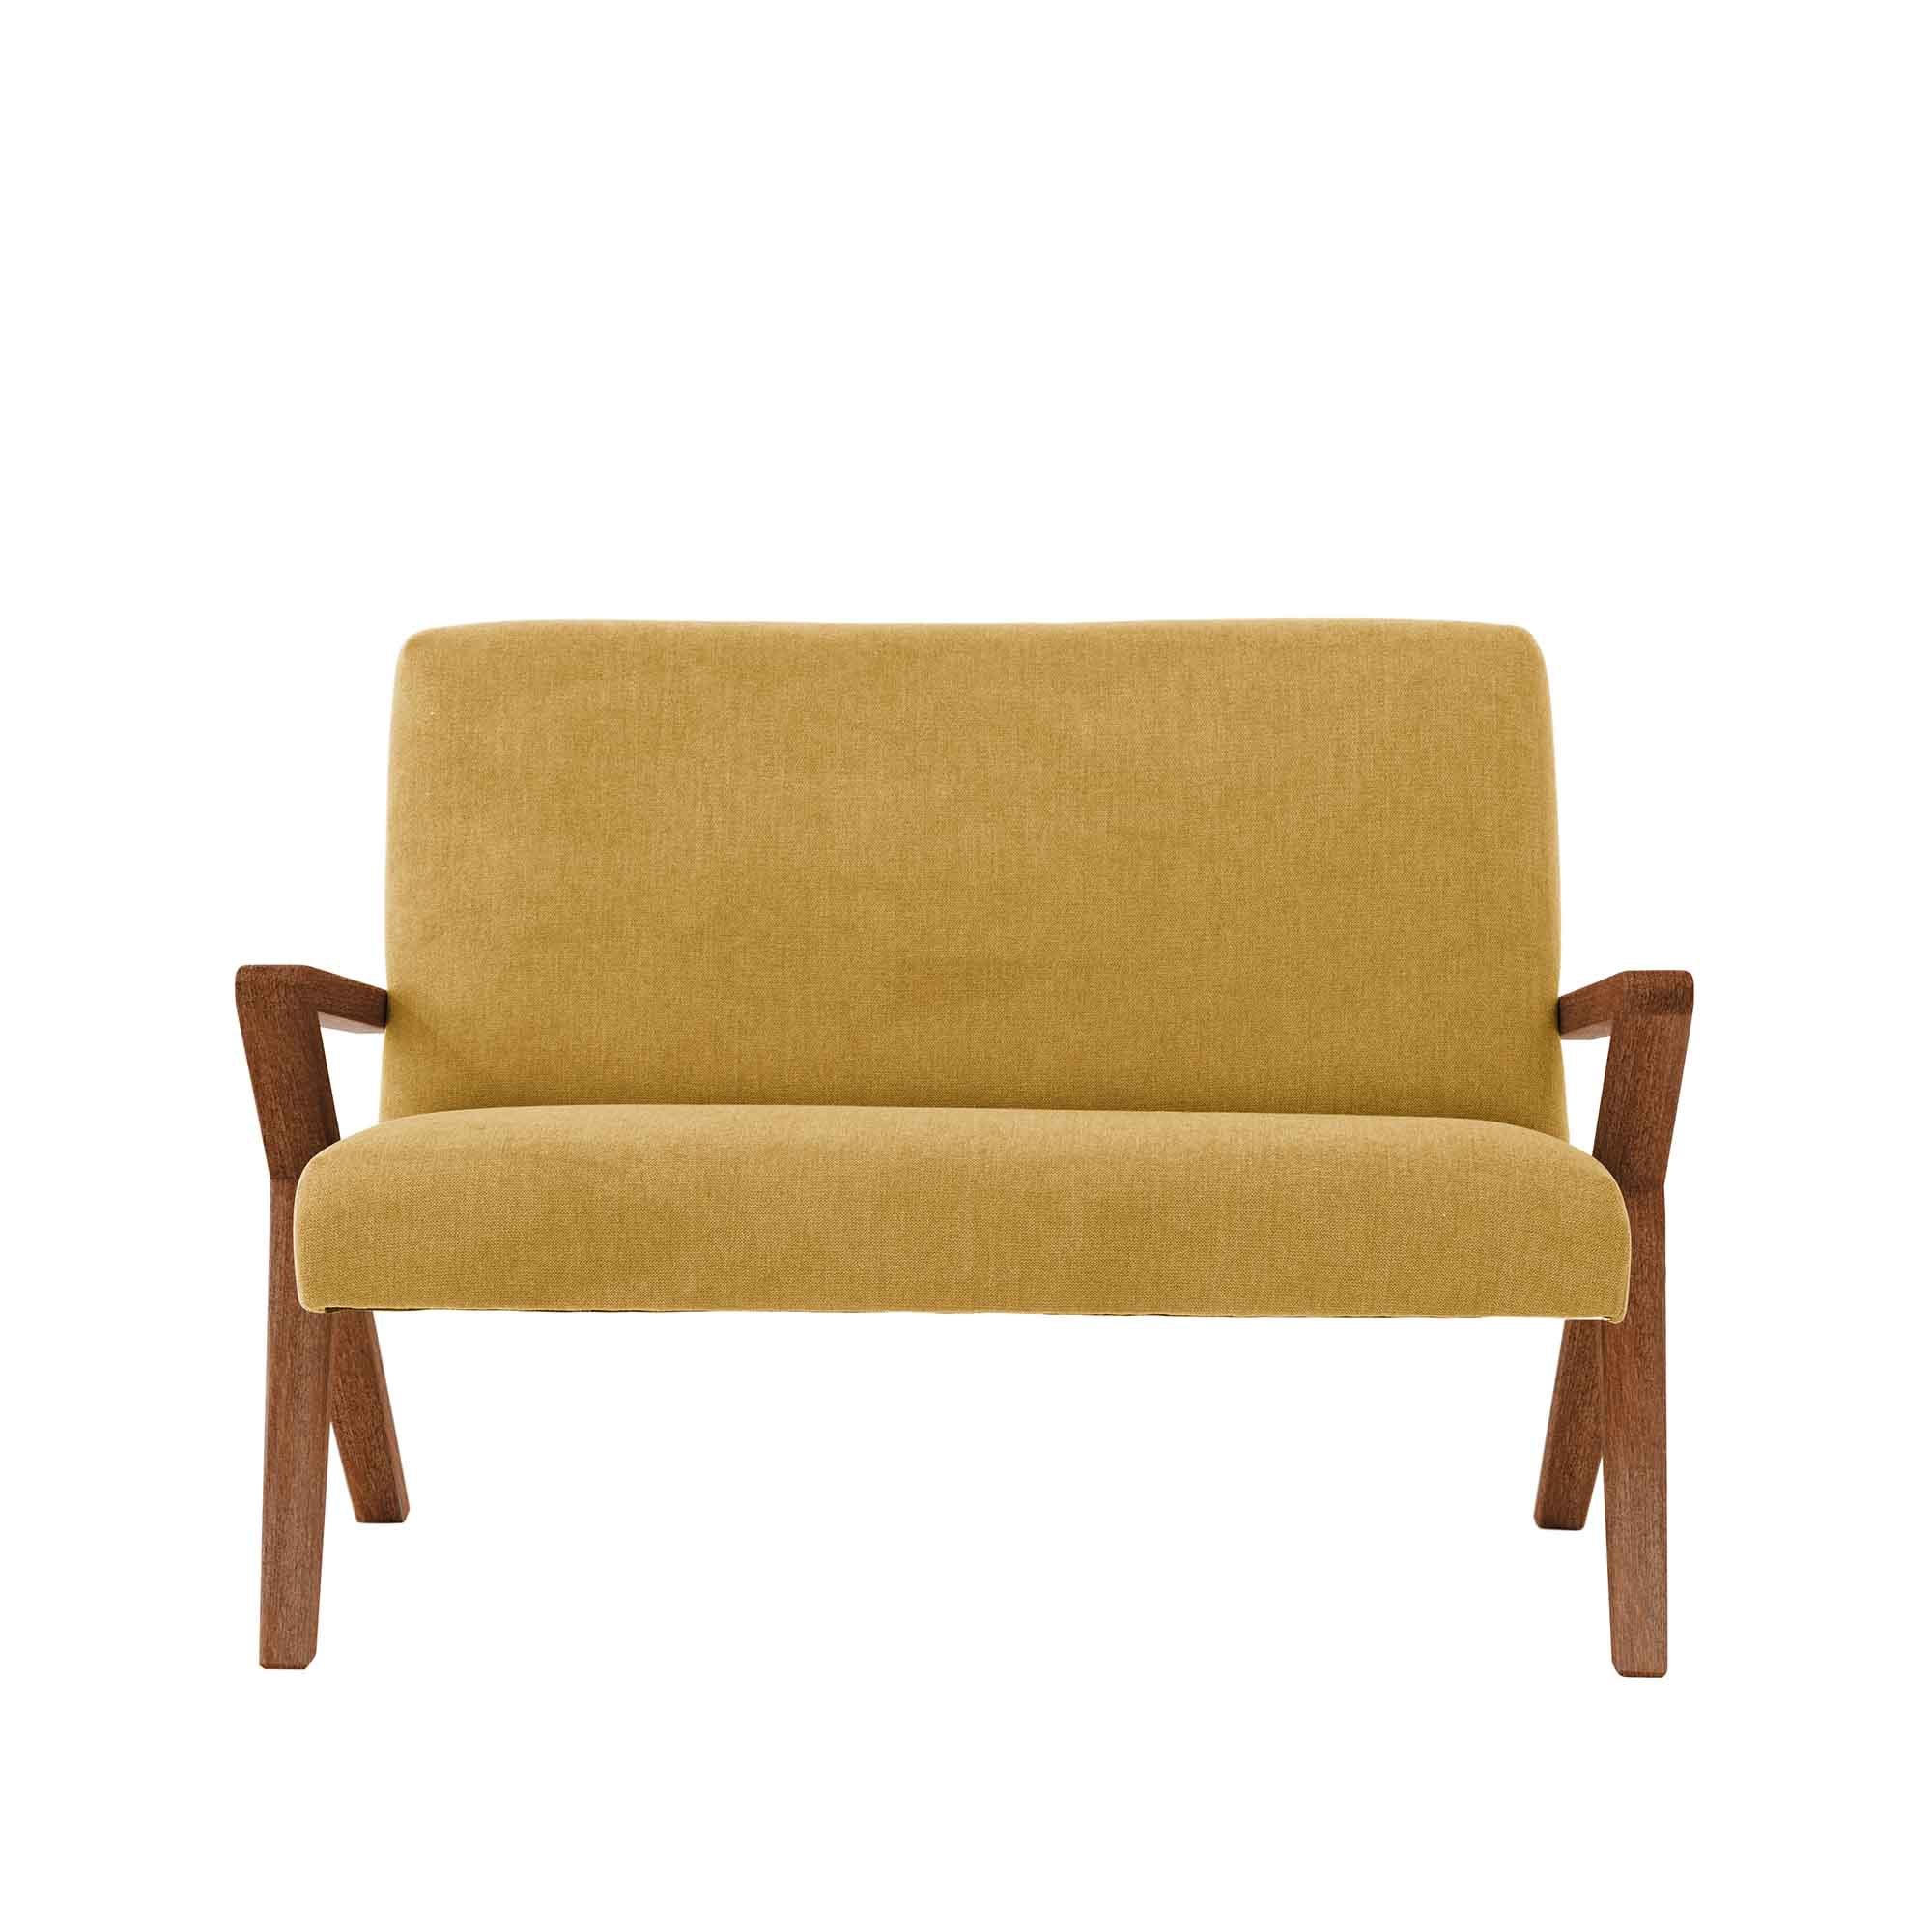  2 Seater Sofa, Beech Wood Frame, Walnut Colour yellow upholstery, front view